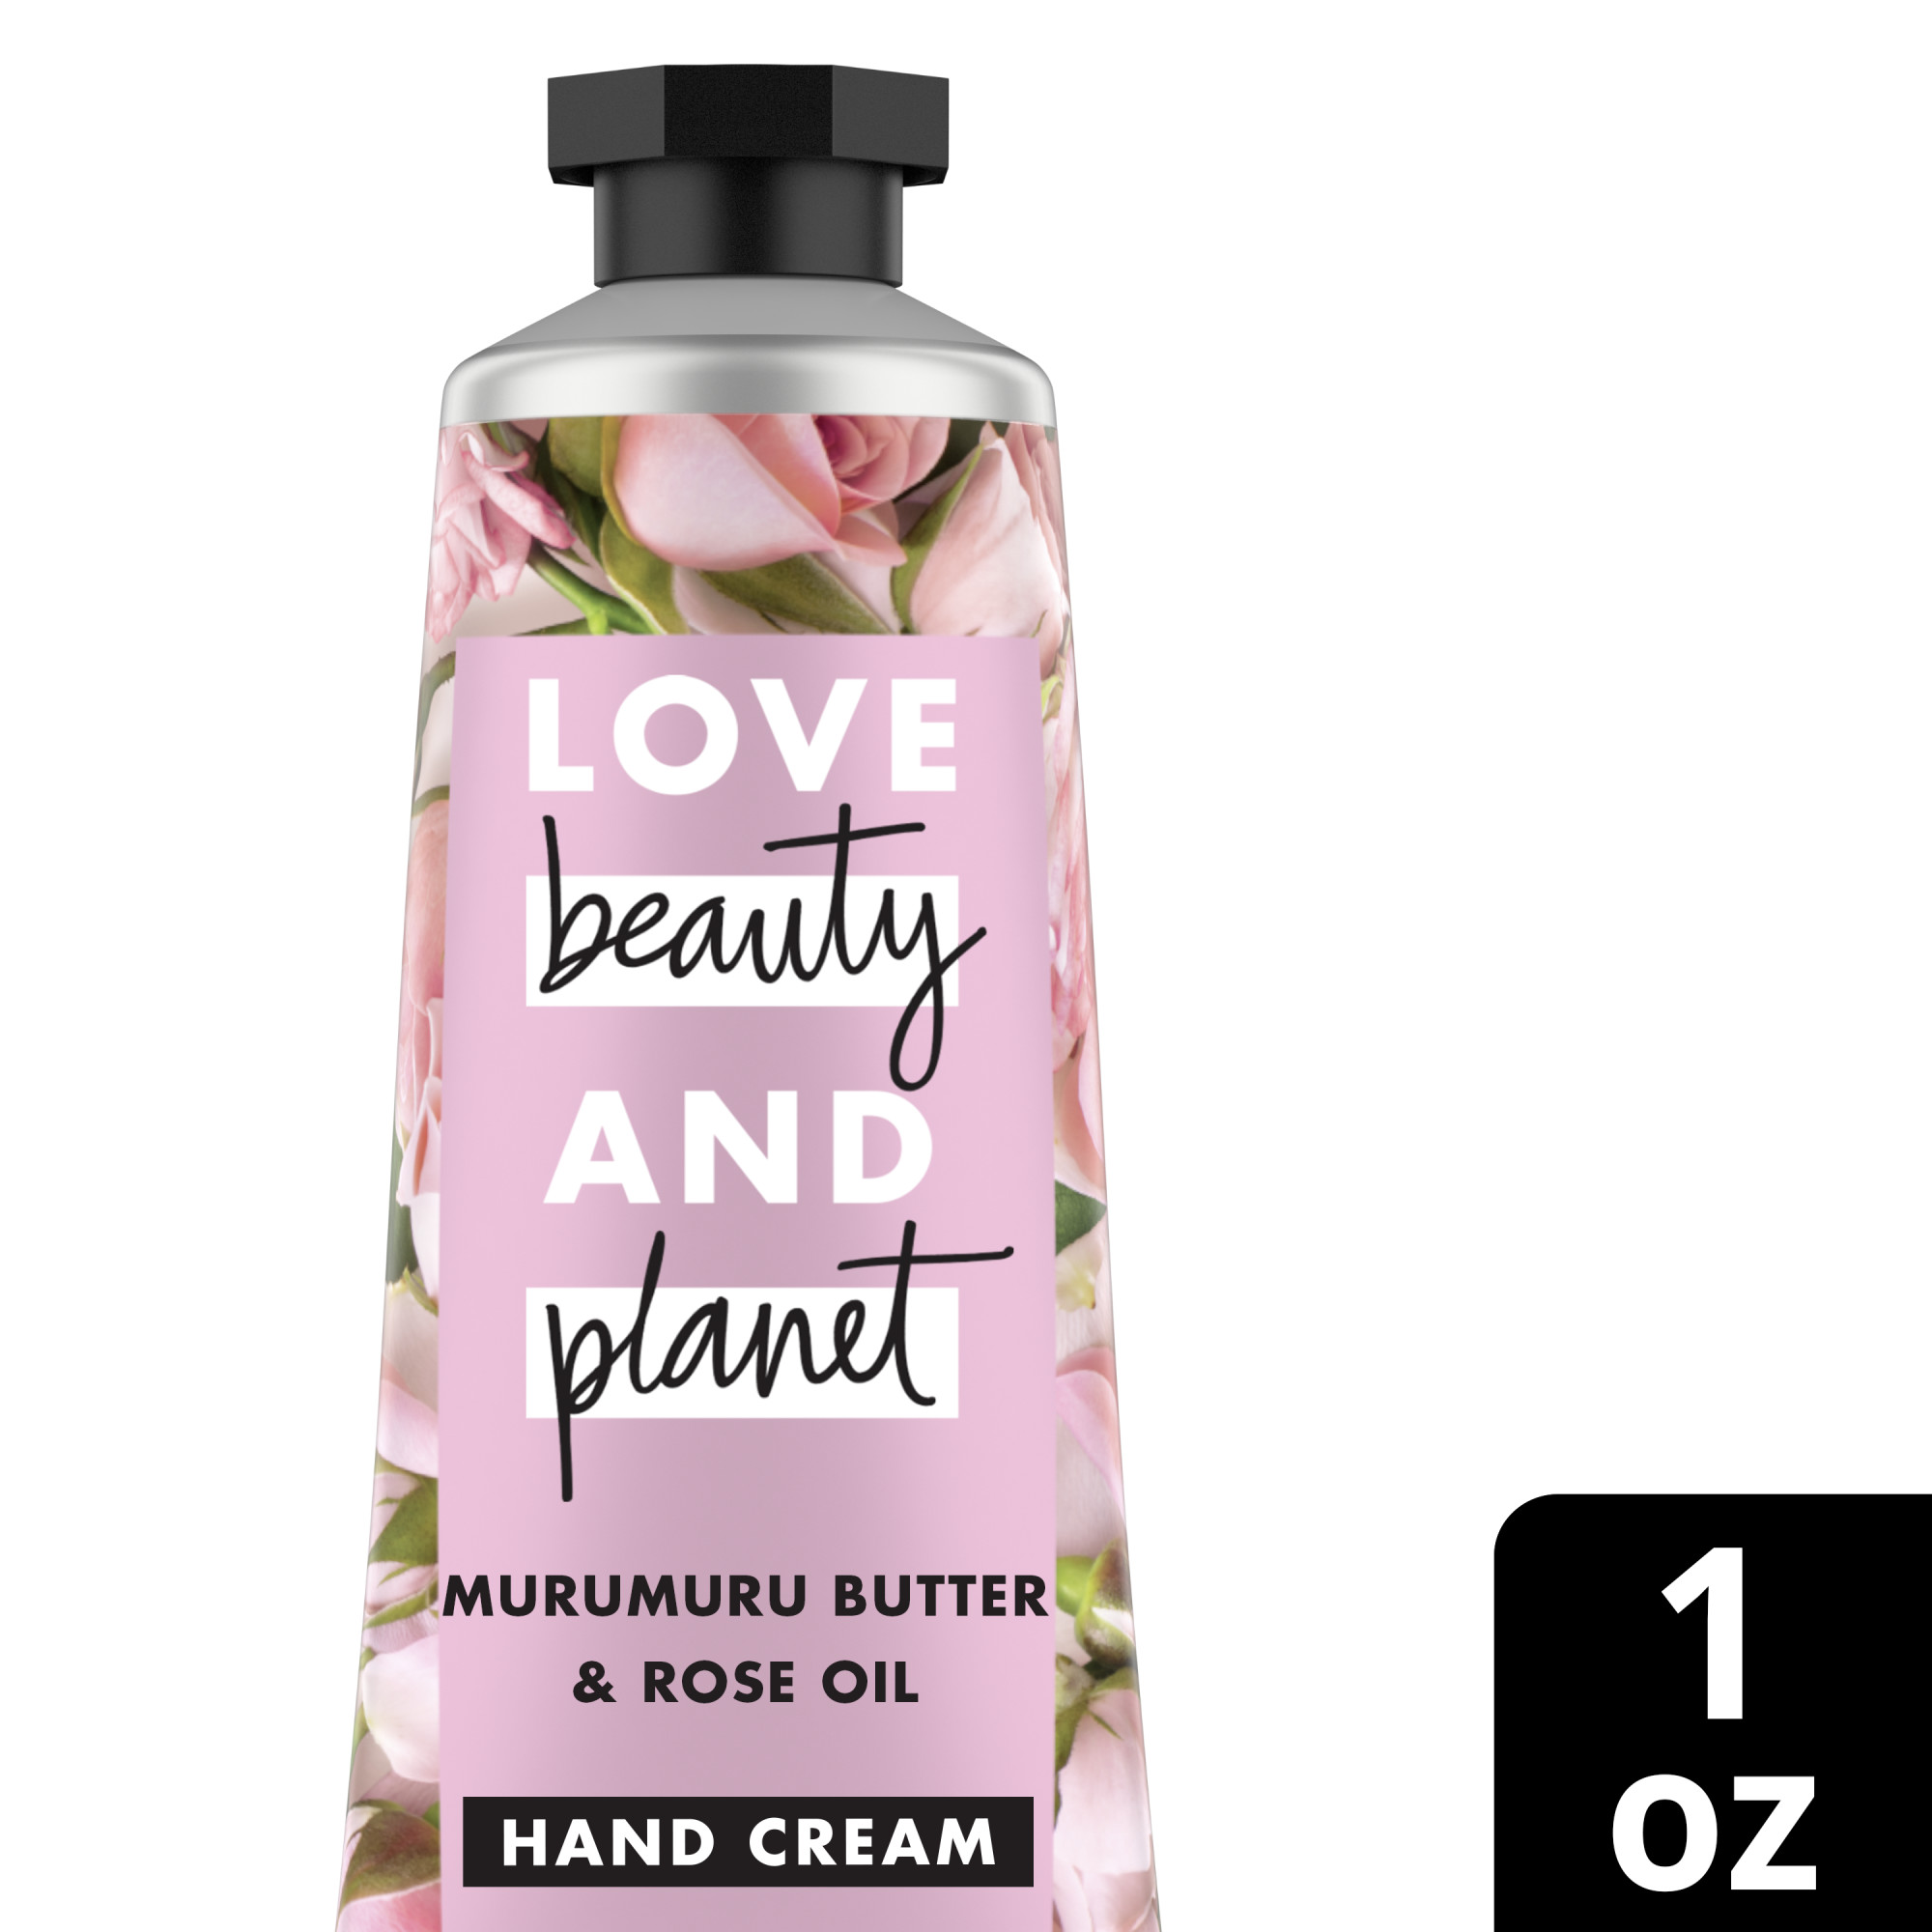 Love Beauty And Planet Murumuru Butter & Rose Hand Cream Delicious Glow 1 oz - image 1 of 9